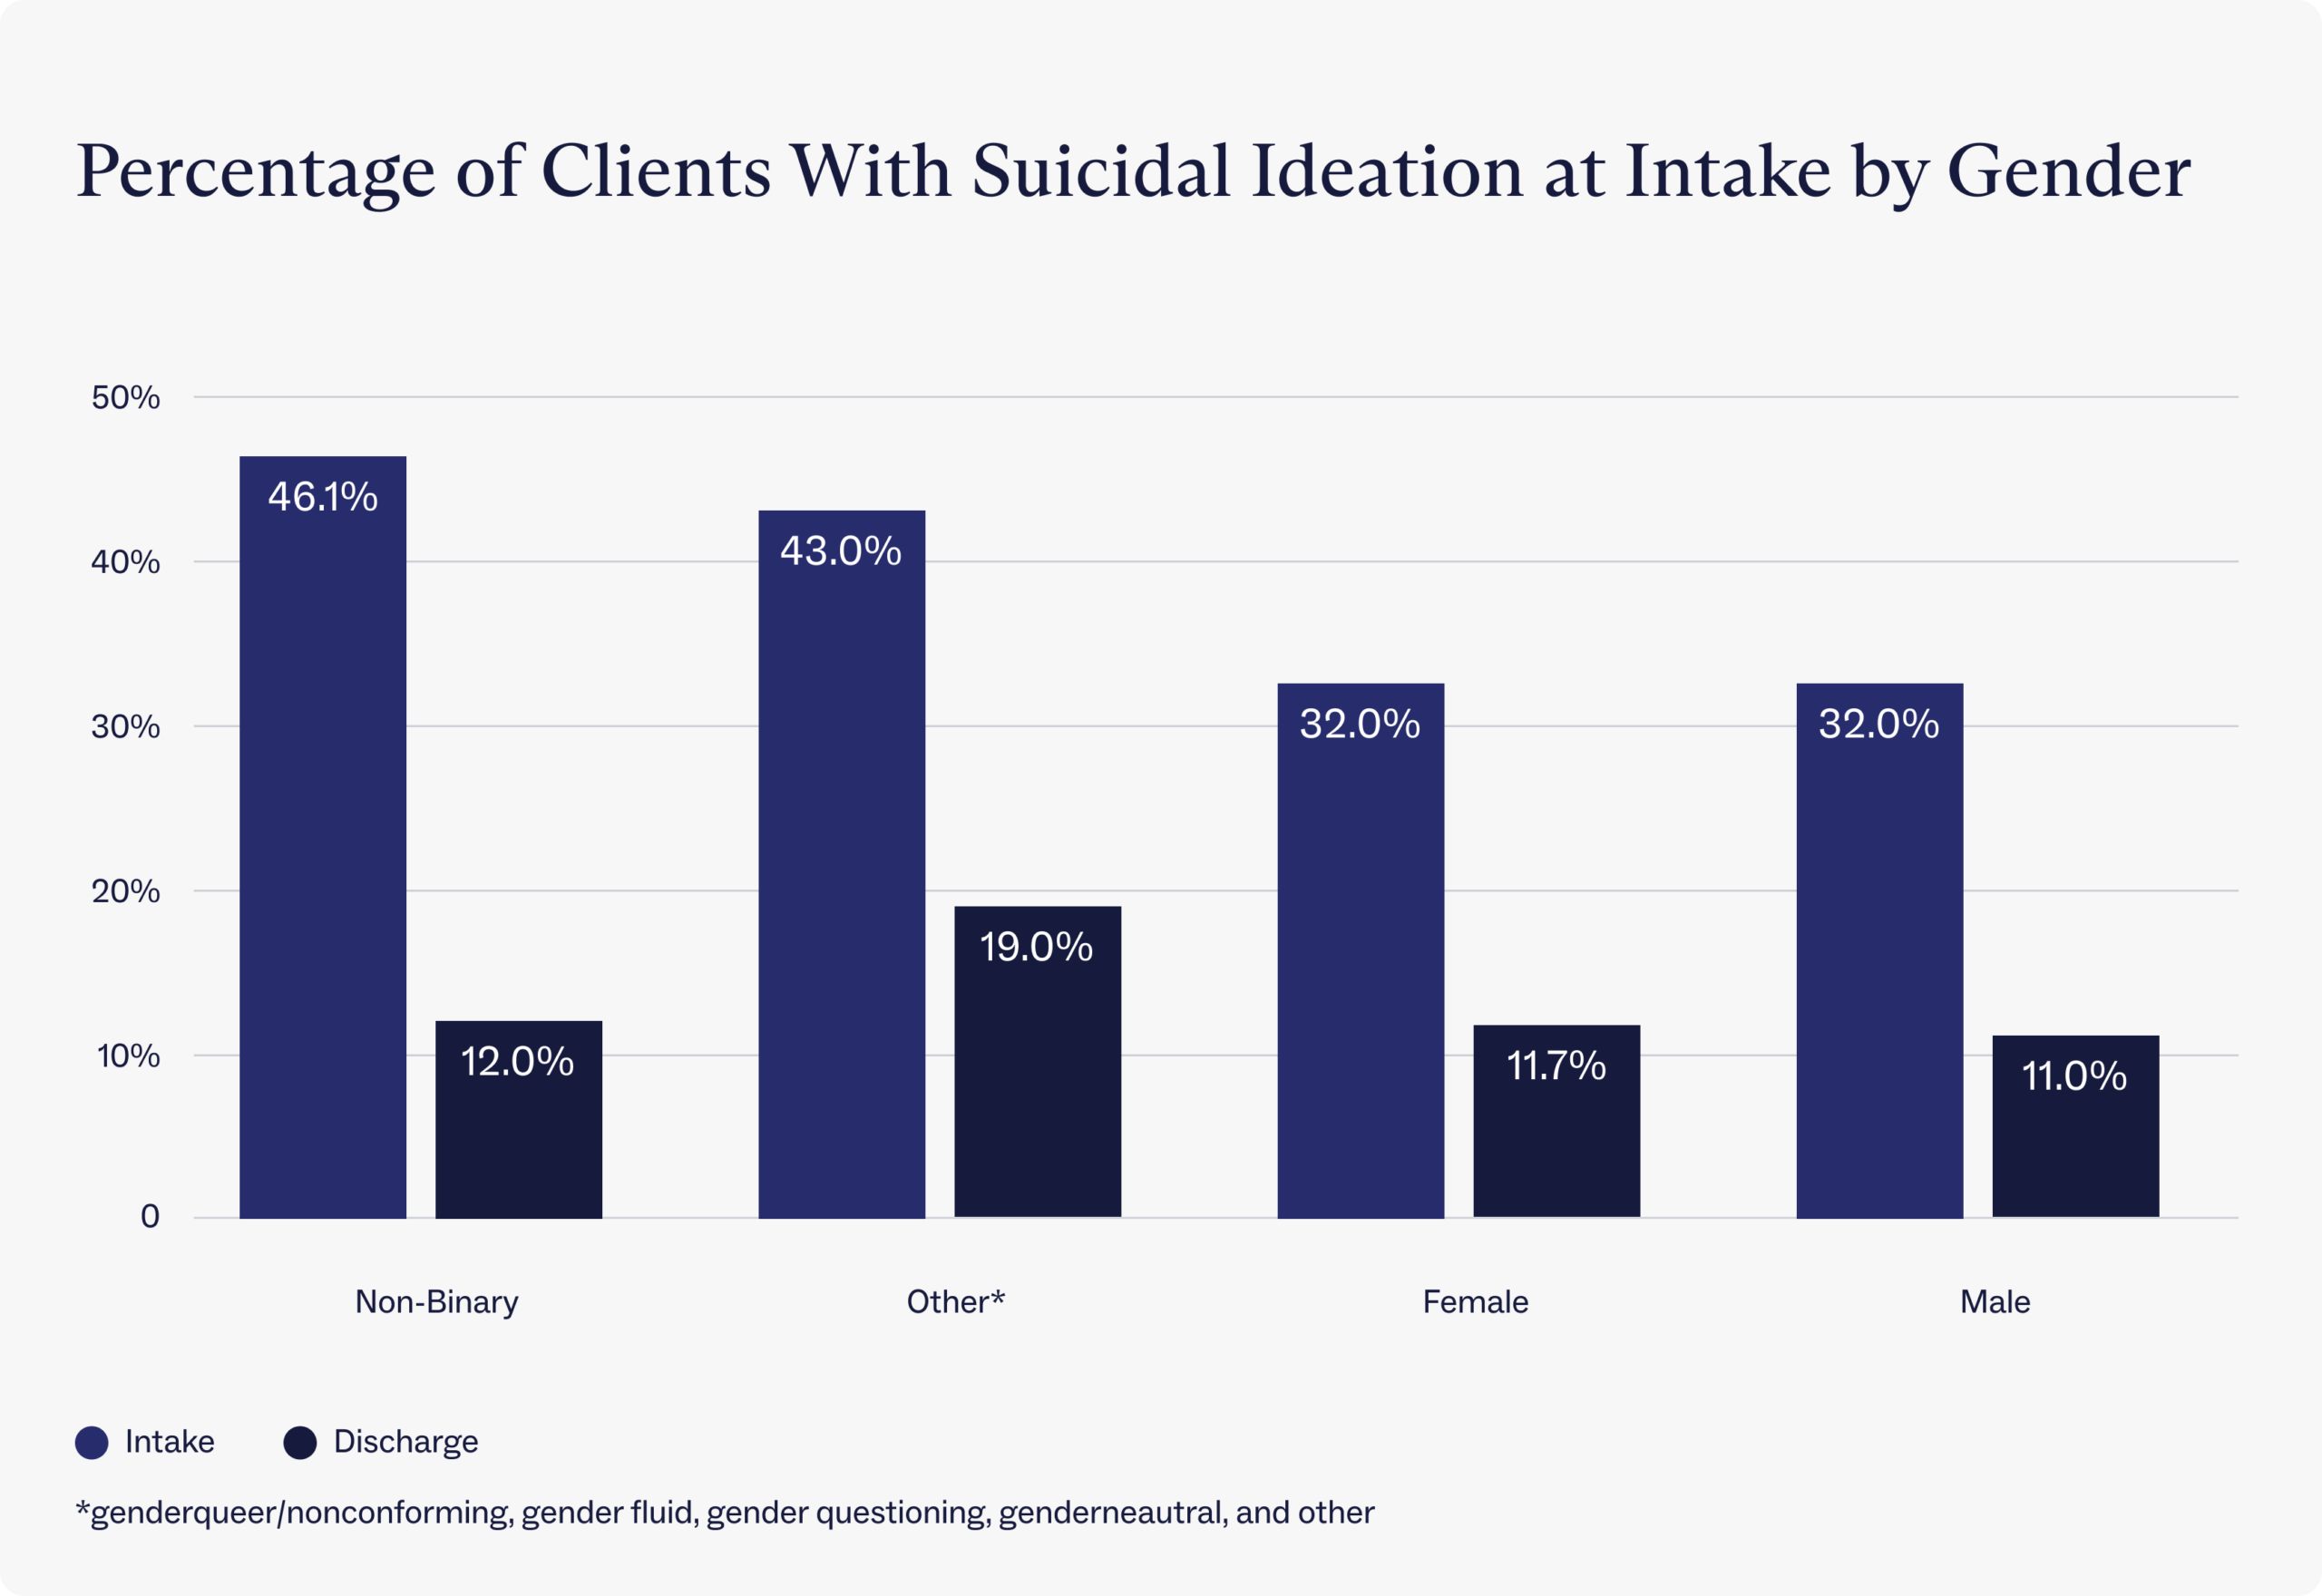 Percentage of Charlie Health clients with suicidal ideation at intake and discharge by gender